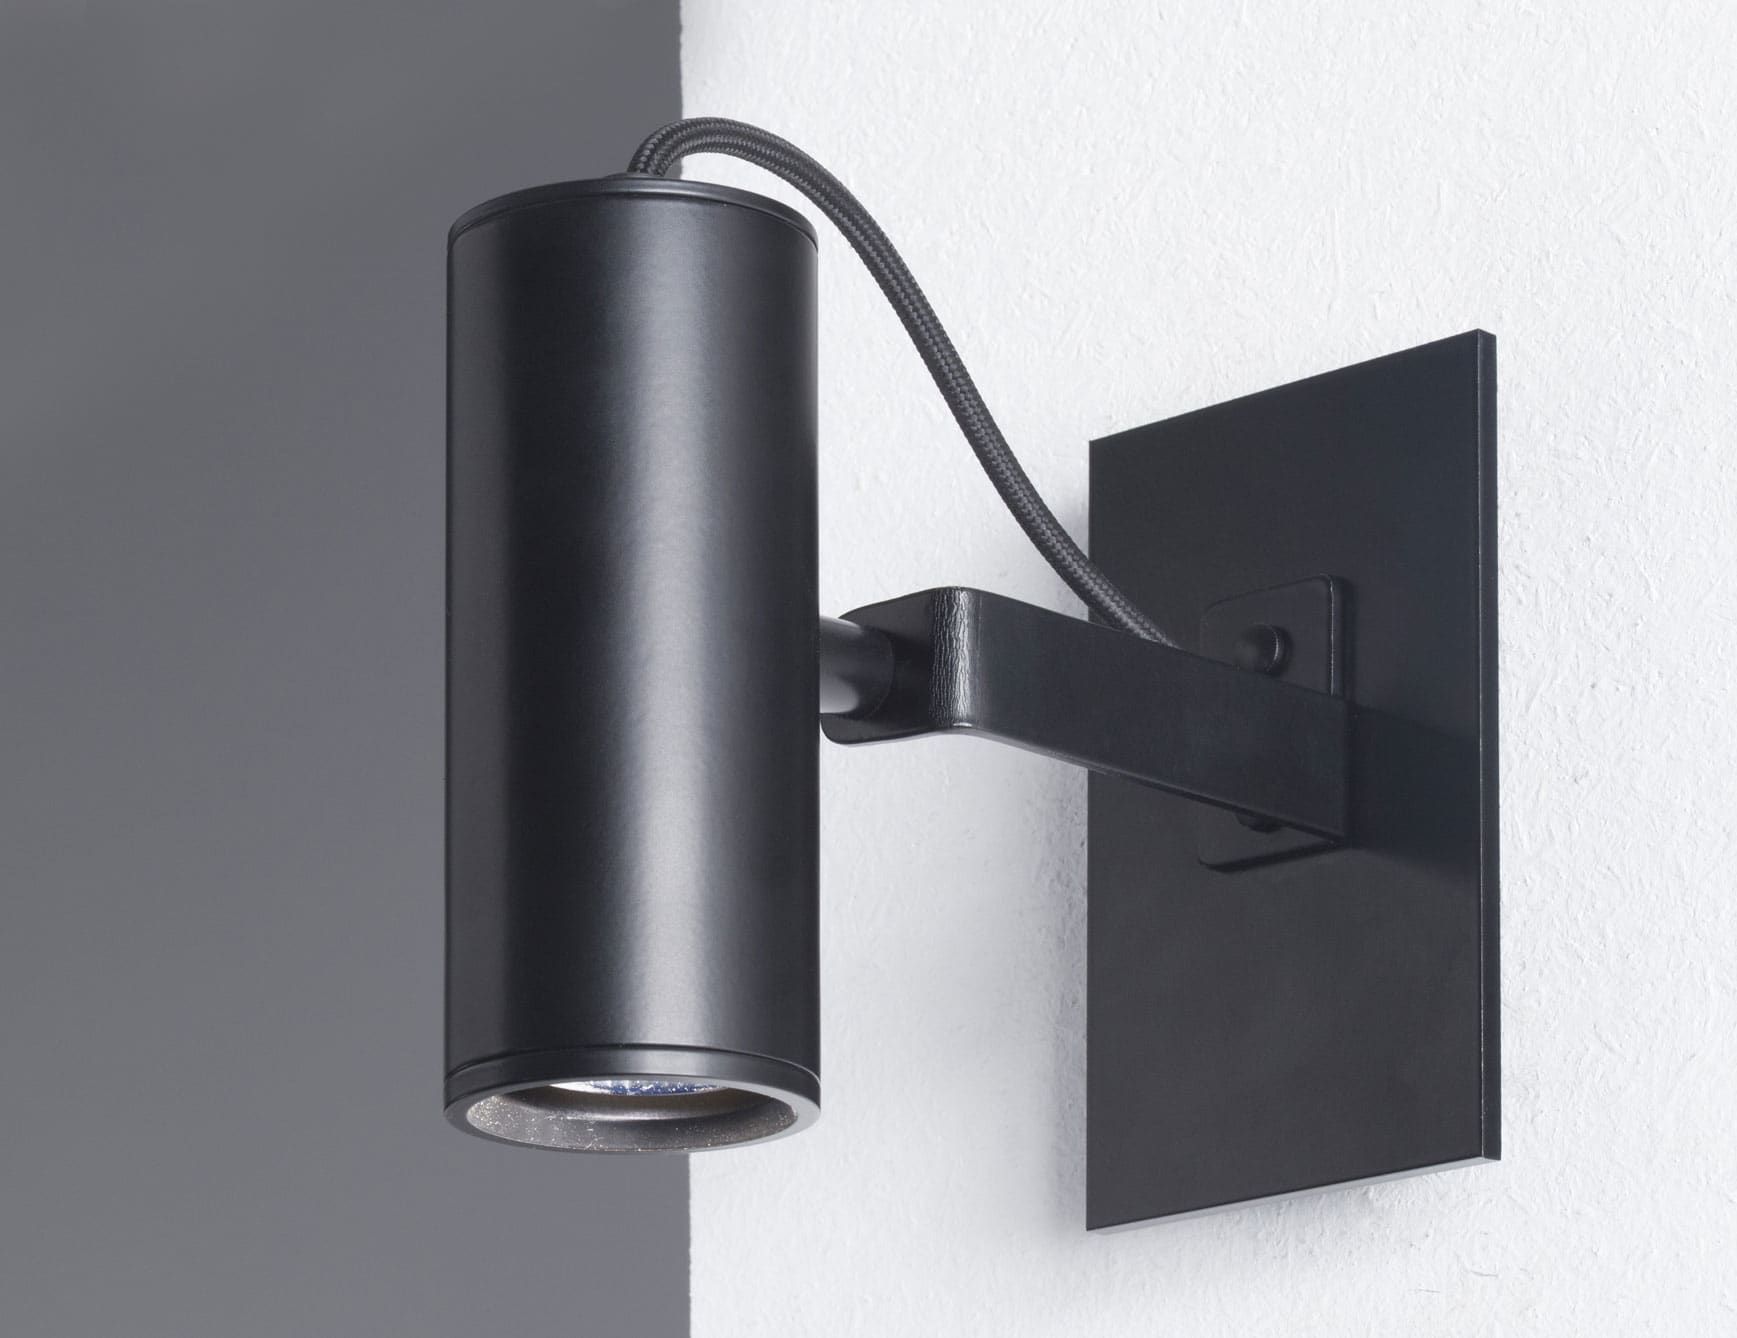 Sabeen modern Italian sconce with black metal